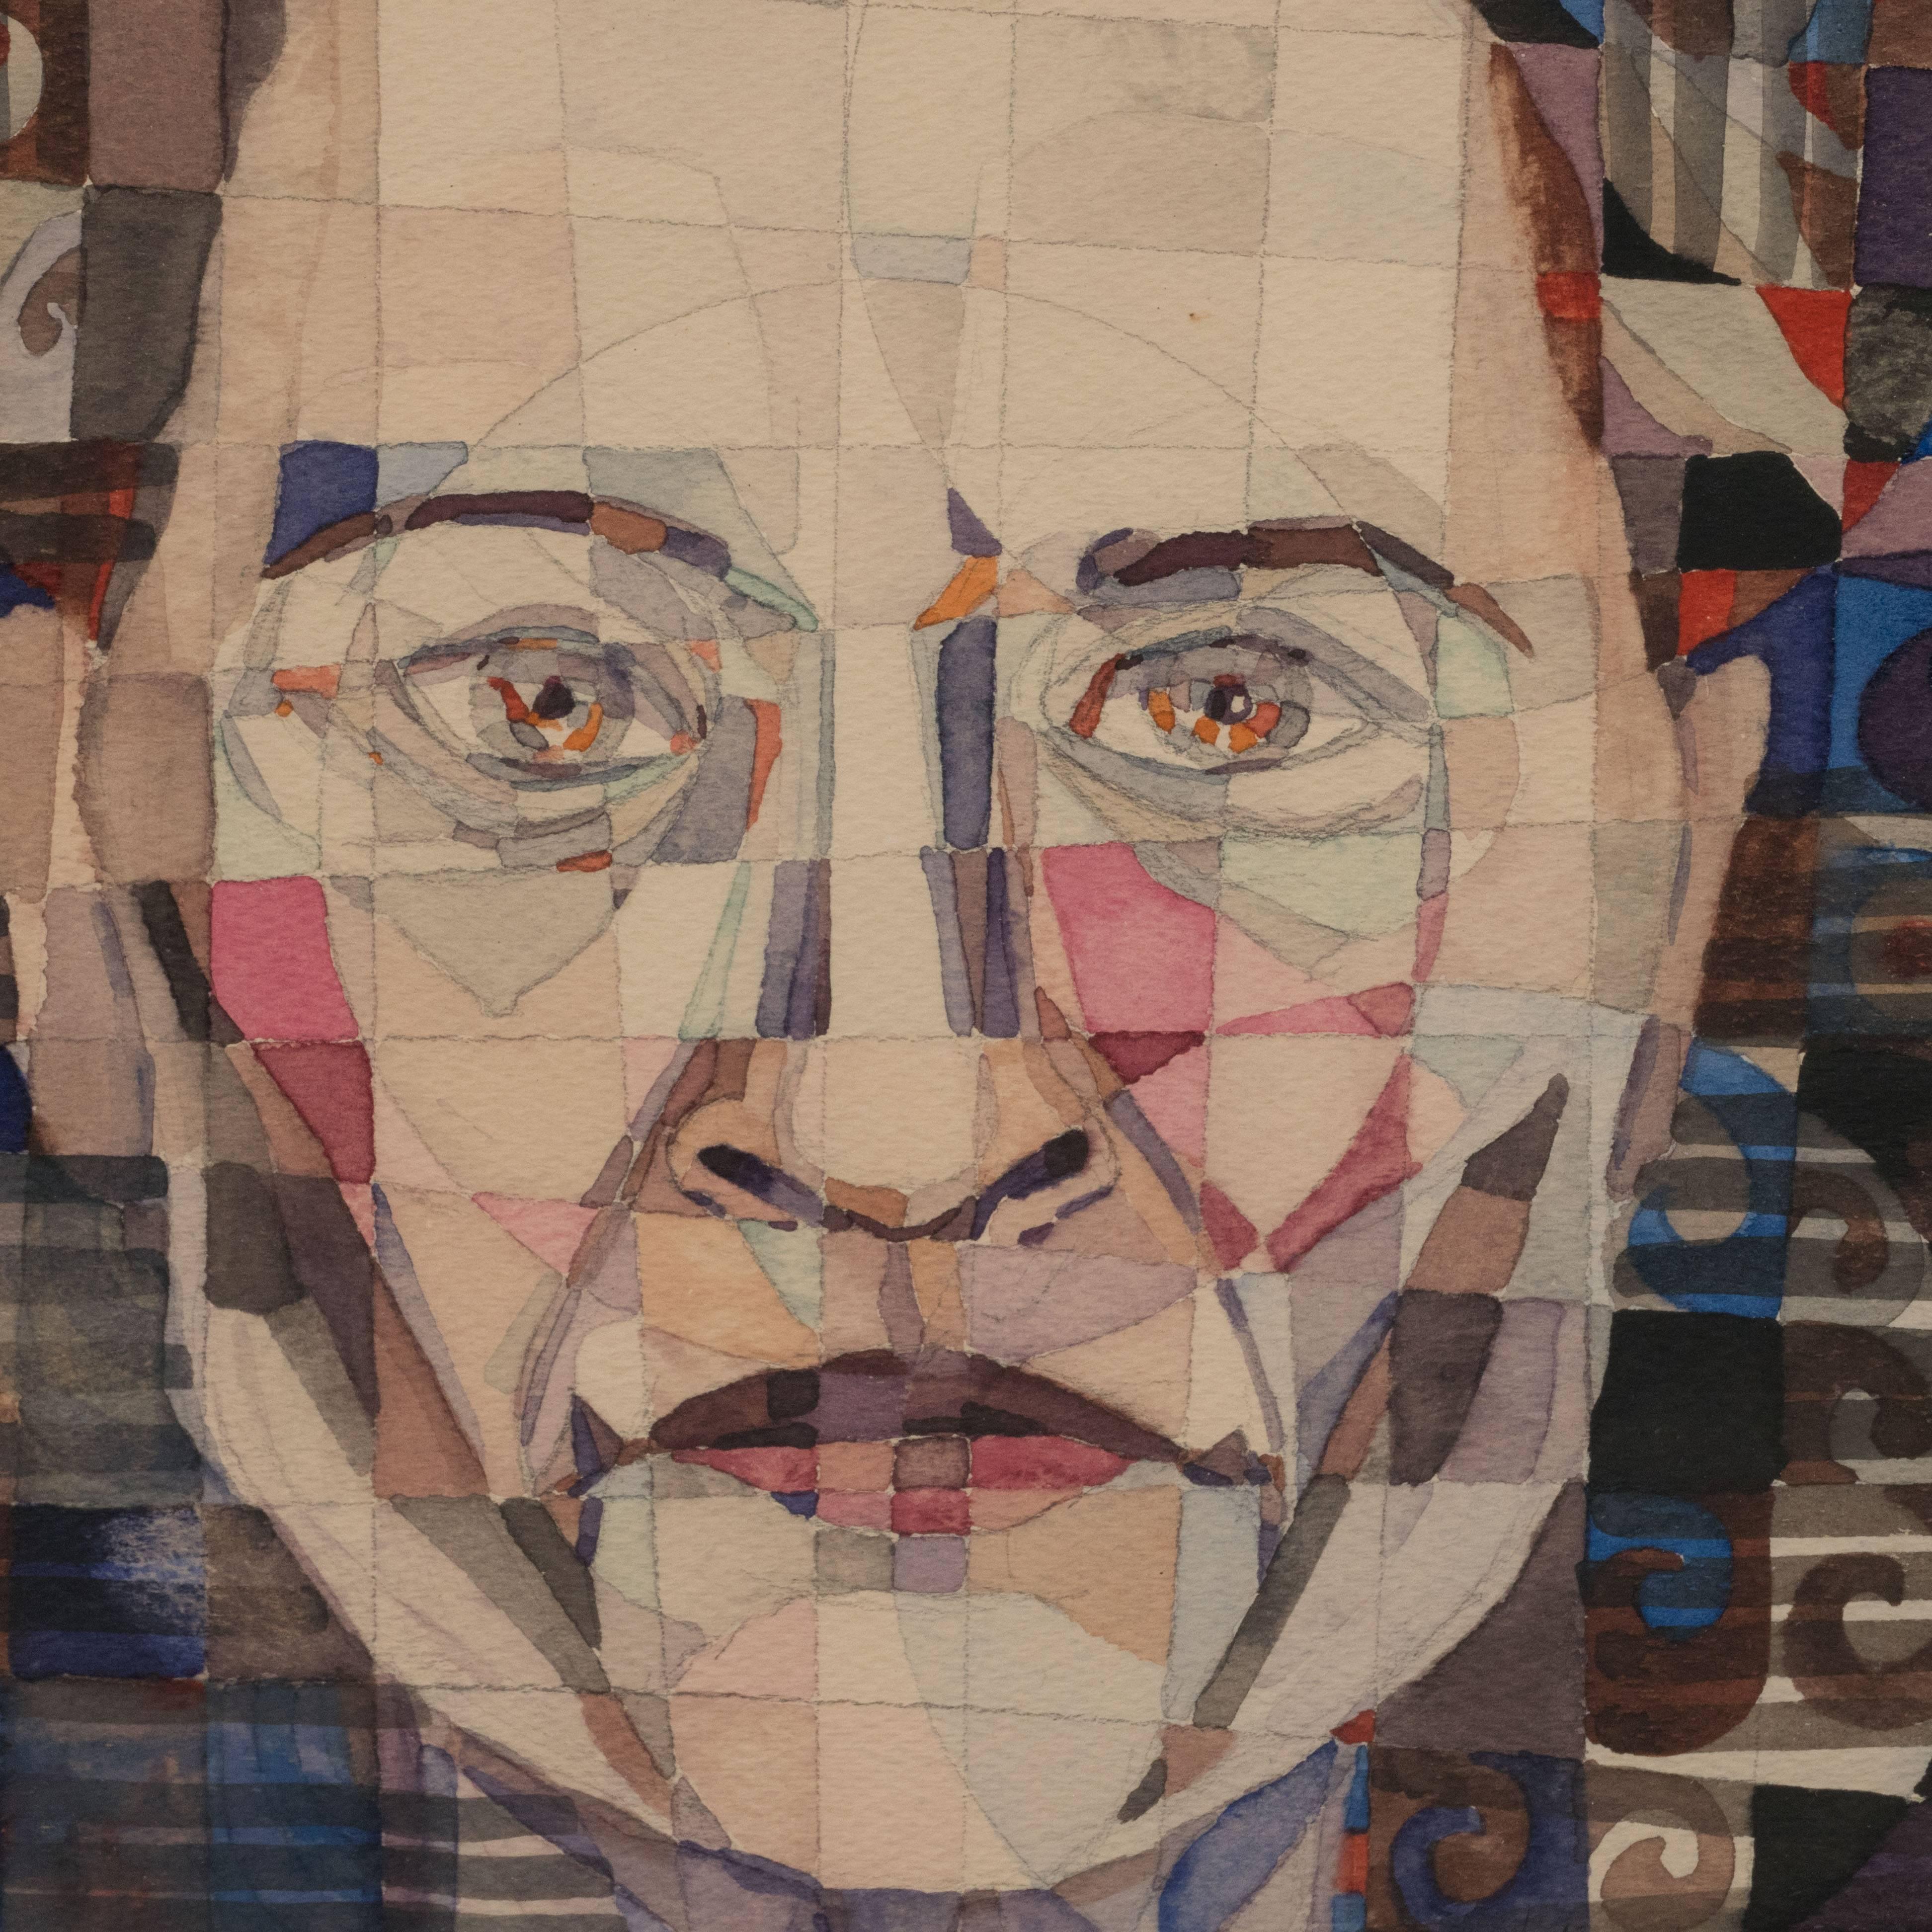 Late 20th Century Modernist Abstract Portrait in Watercolor, Ink, and Pencil by Marshall Watkins